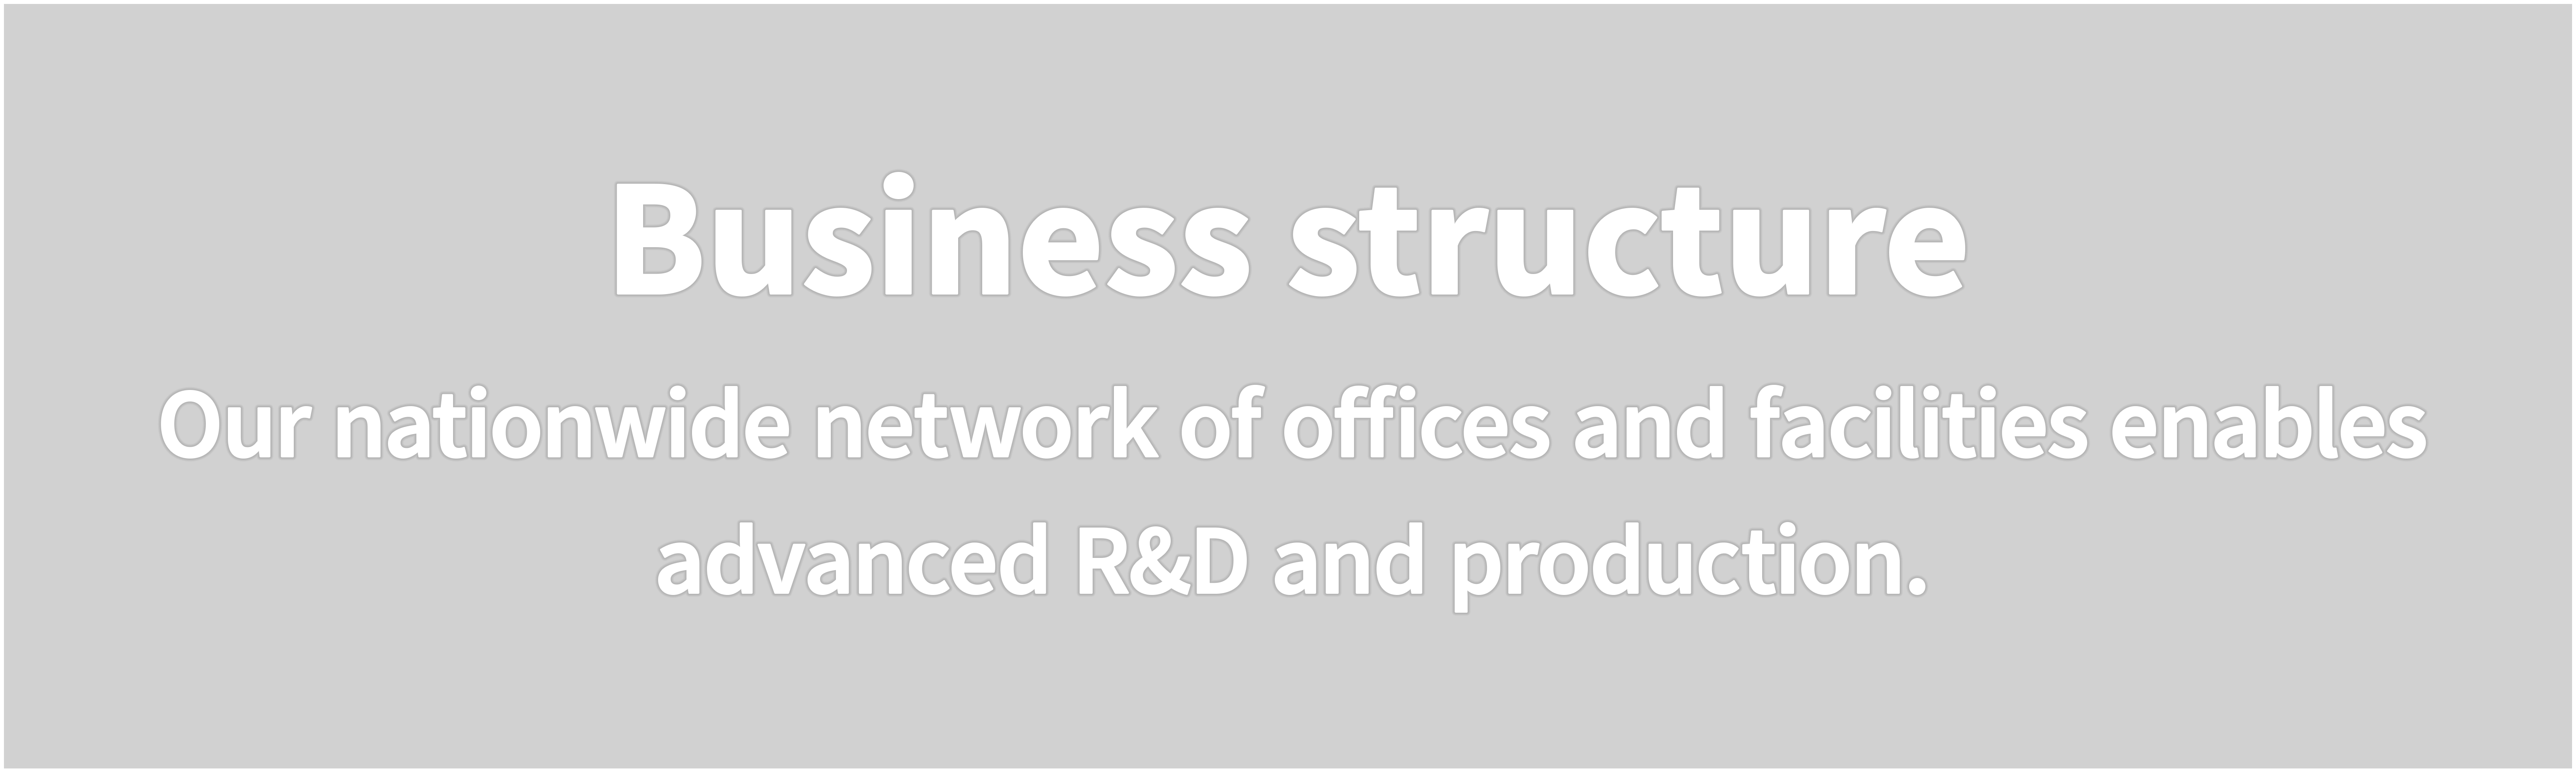 Business structure  Our nationwide network of offices and facilities enables advanced R&D and production.